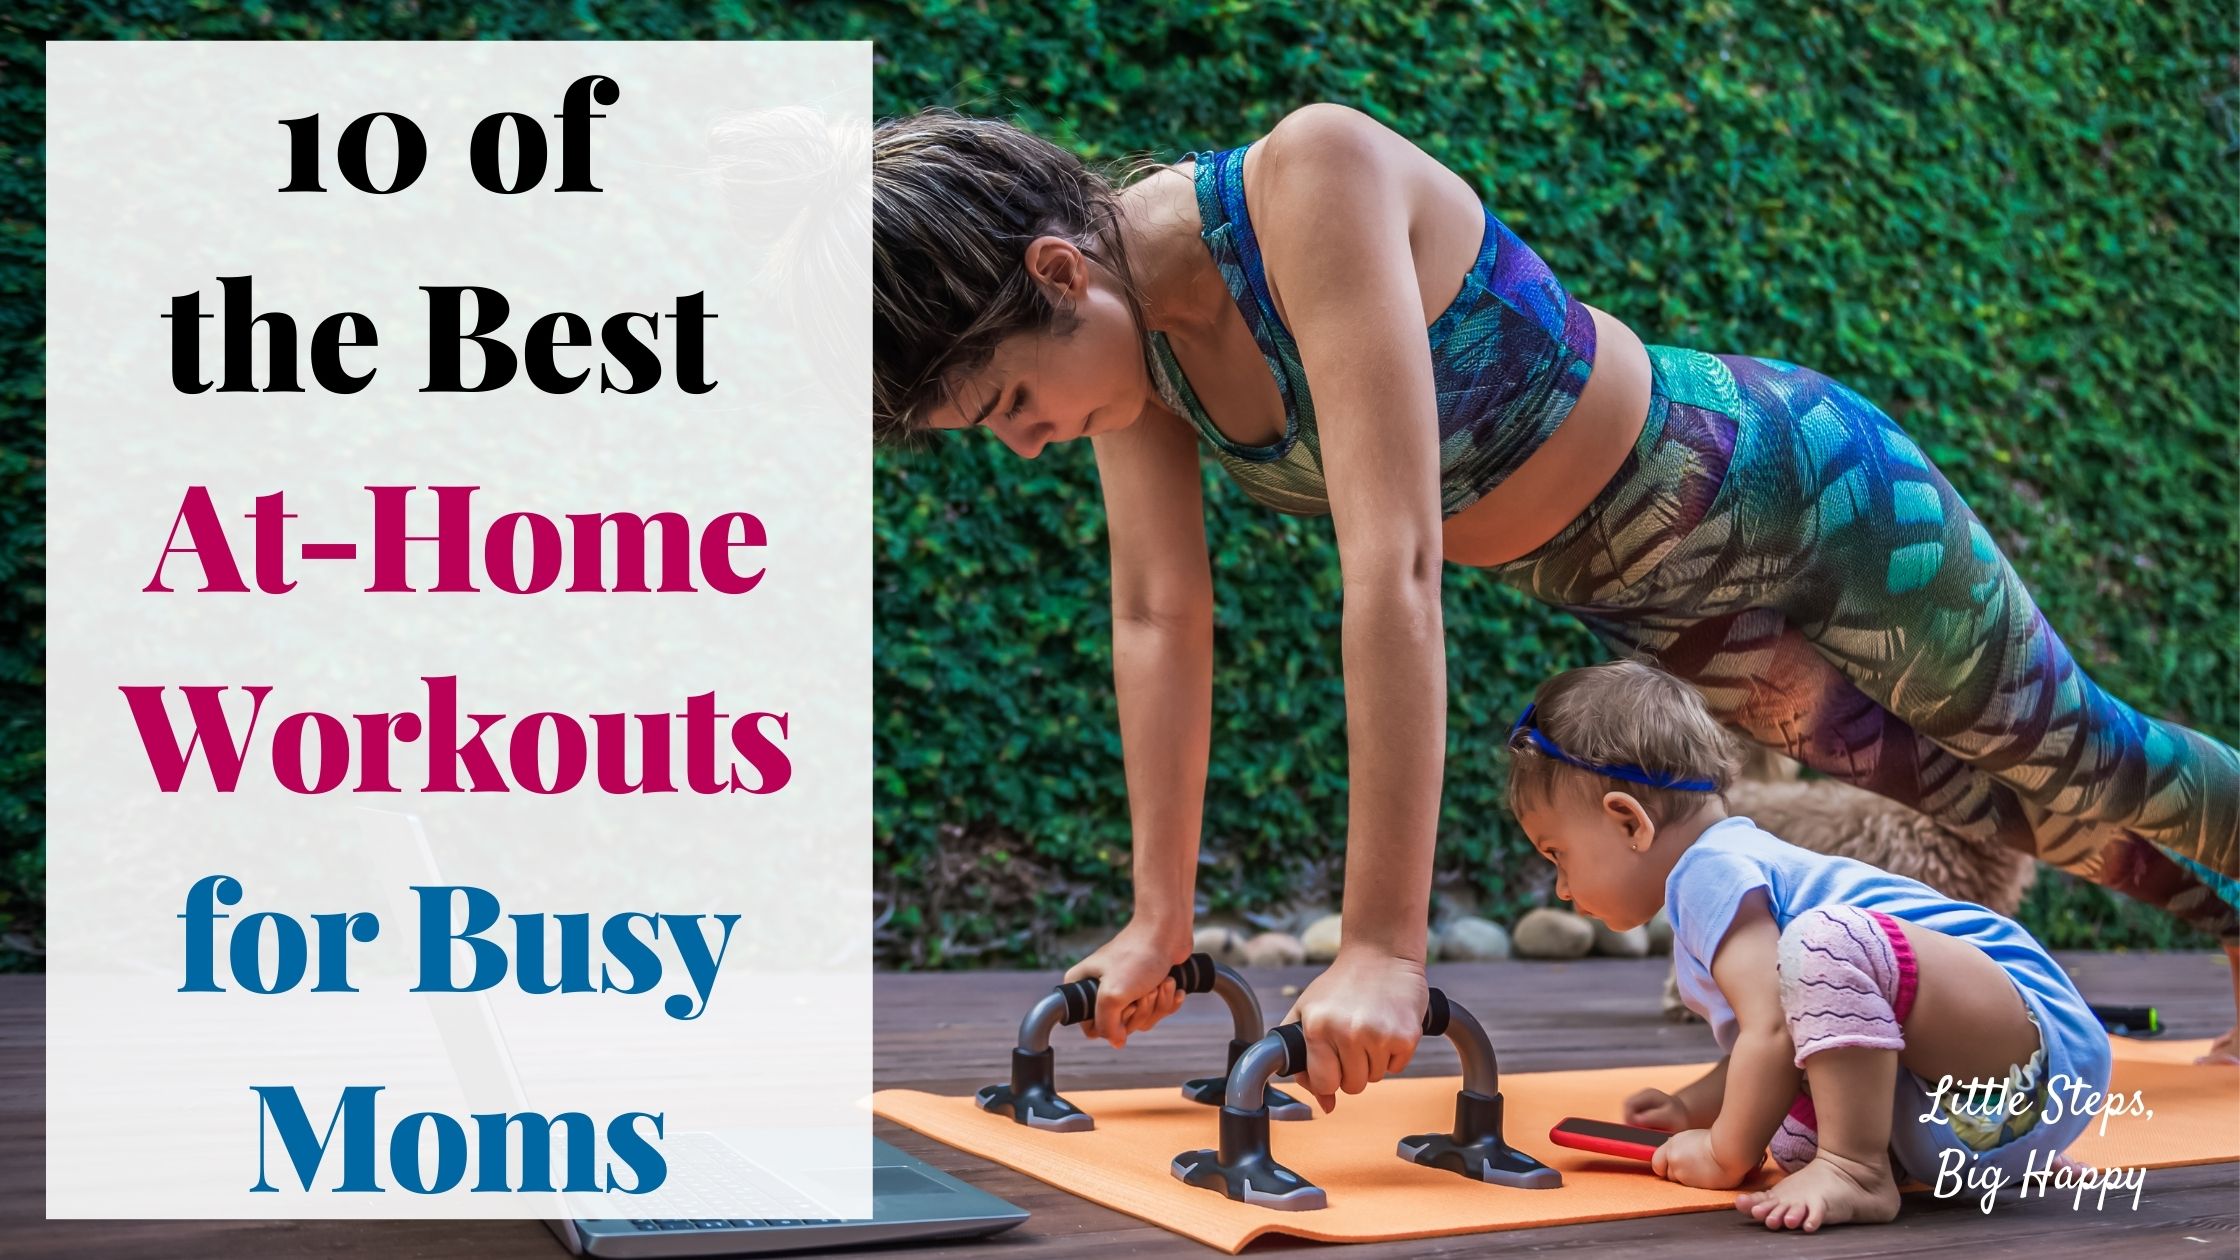 Woman doing a plank looking at a laptop while her daughter plays next to her. Text says: 10 of the Best At Home Workouts for Busy Moms